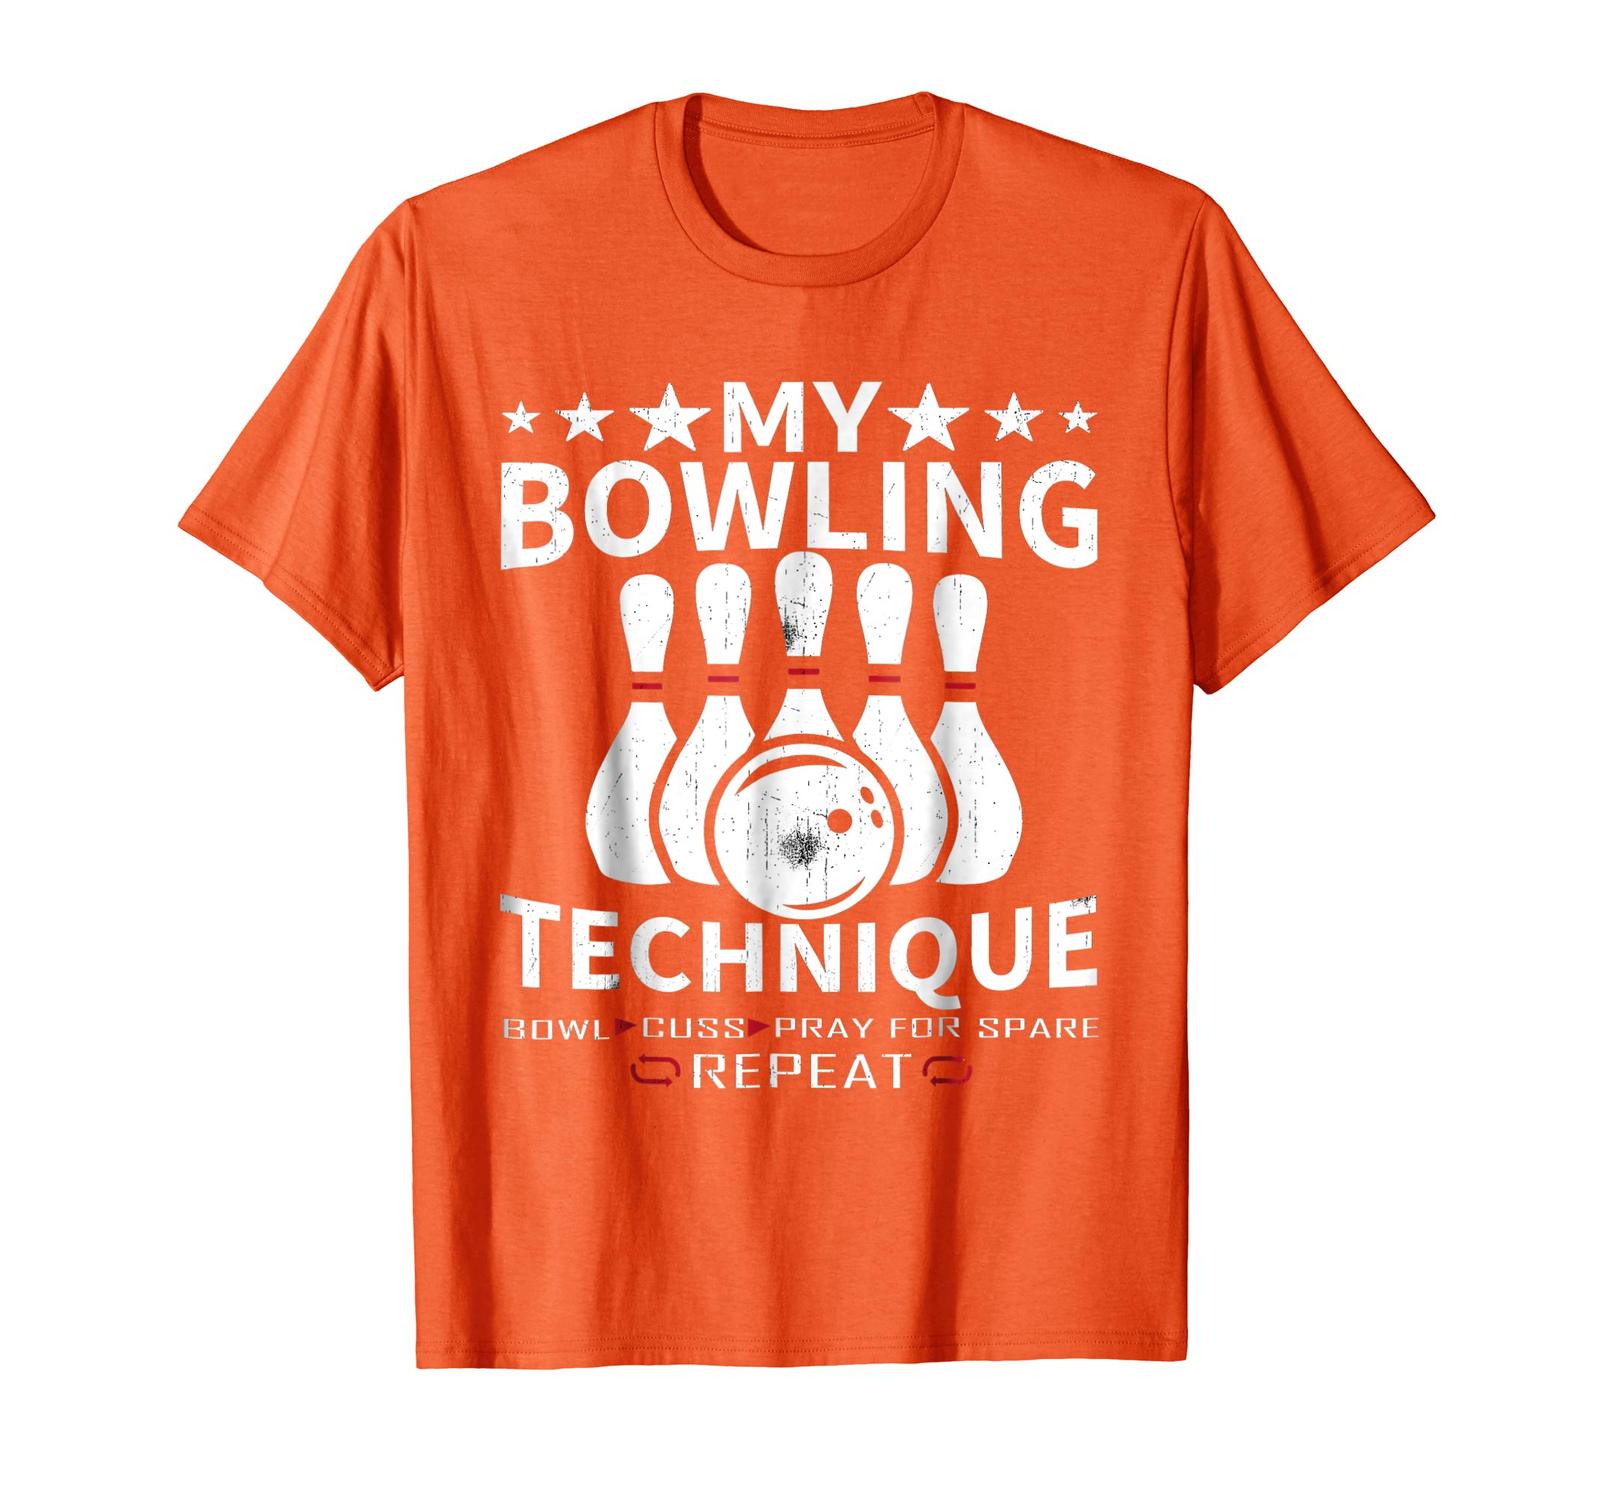 Funny Tee - My Bowling Technique T-Shirt - Funny Bowl League Member Tee ...